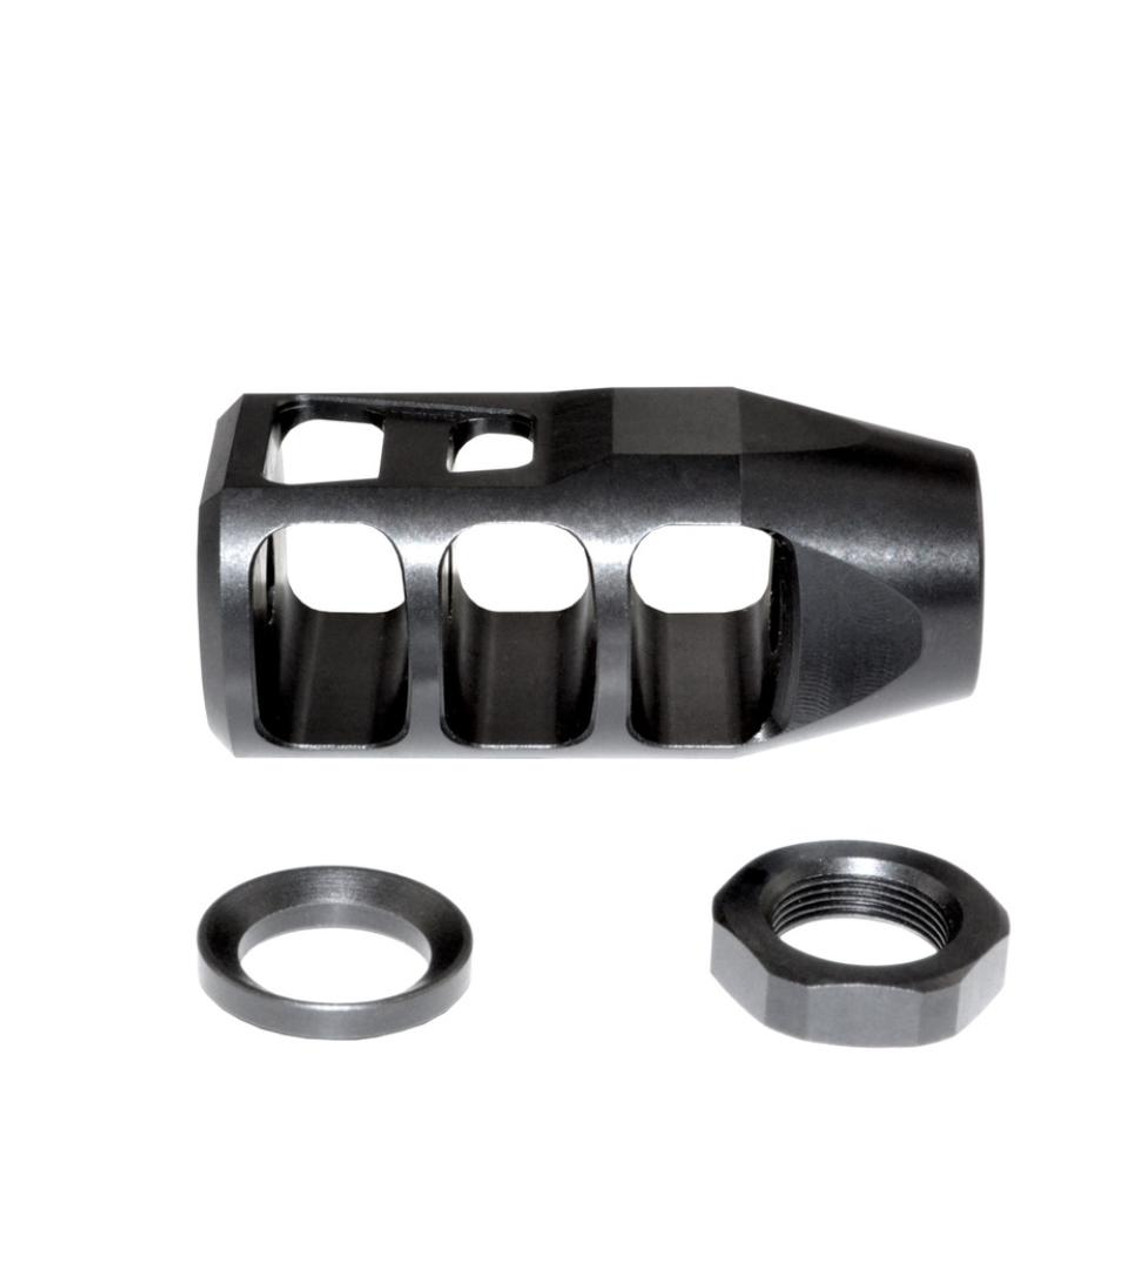 MCS 49/64”x20 Muzzle Brake for .50 Beowulf, Black 